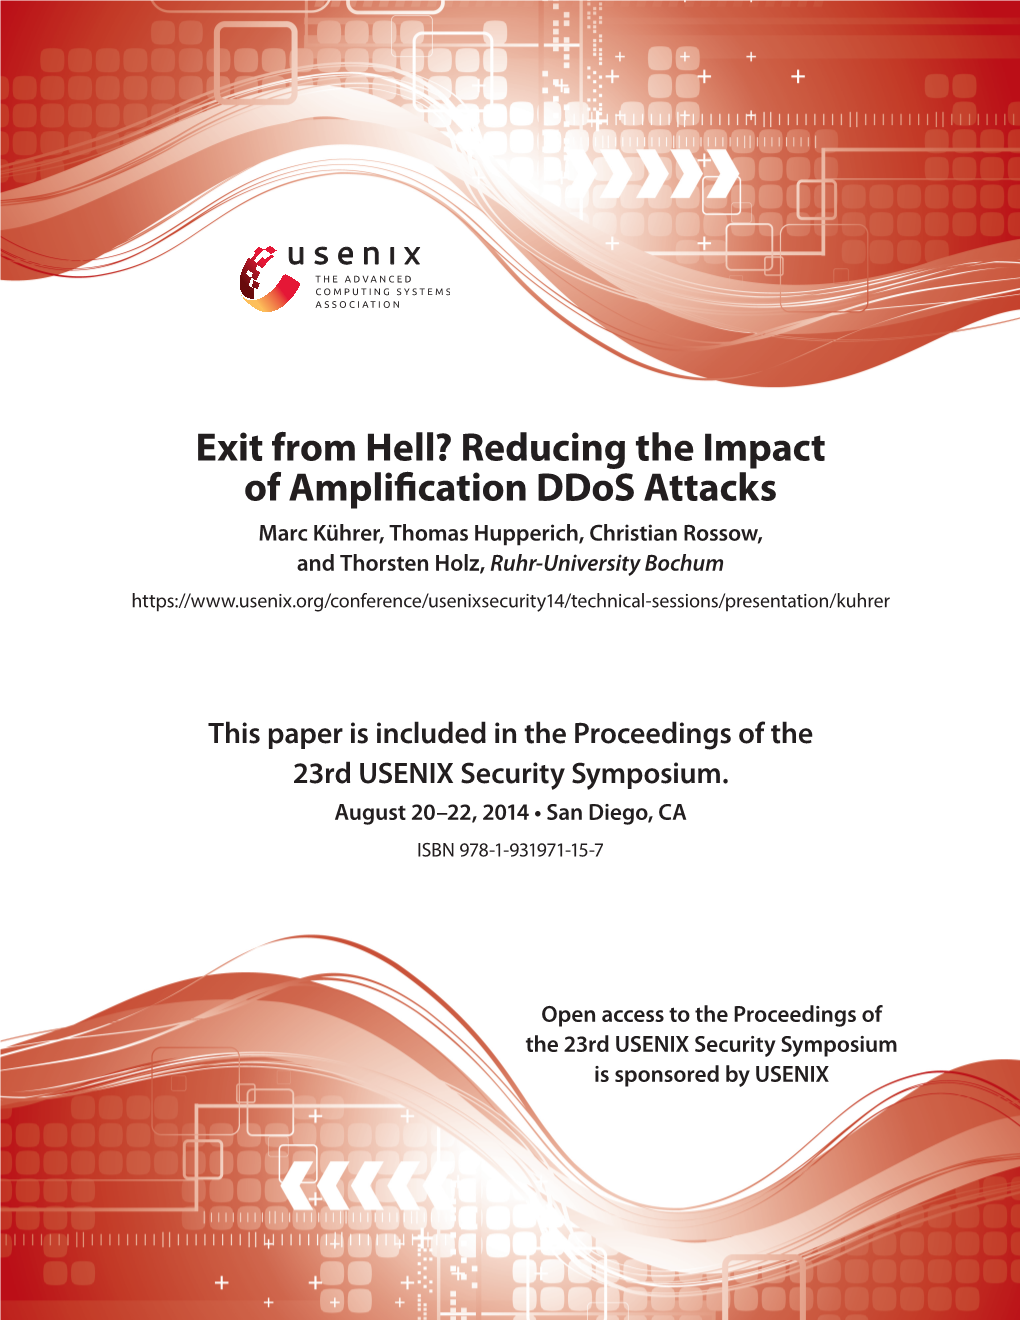 Exit from Hell? Reducing the Impact of Amplification Ddos Attacks